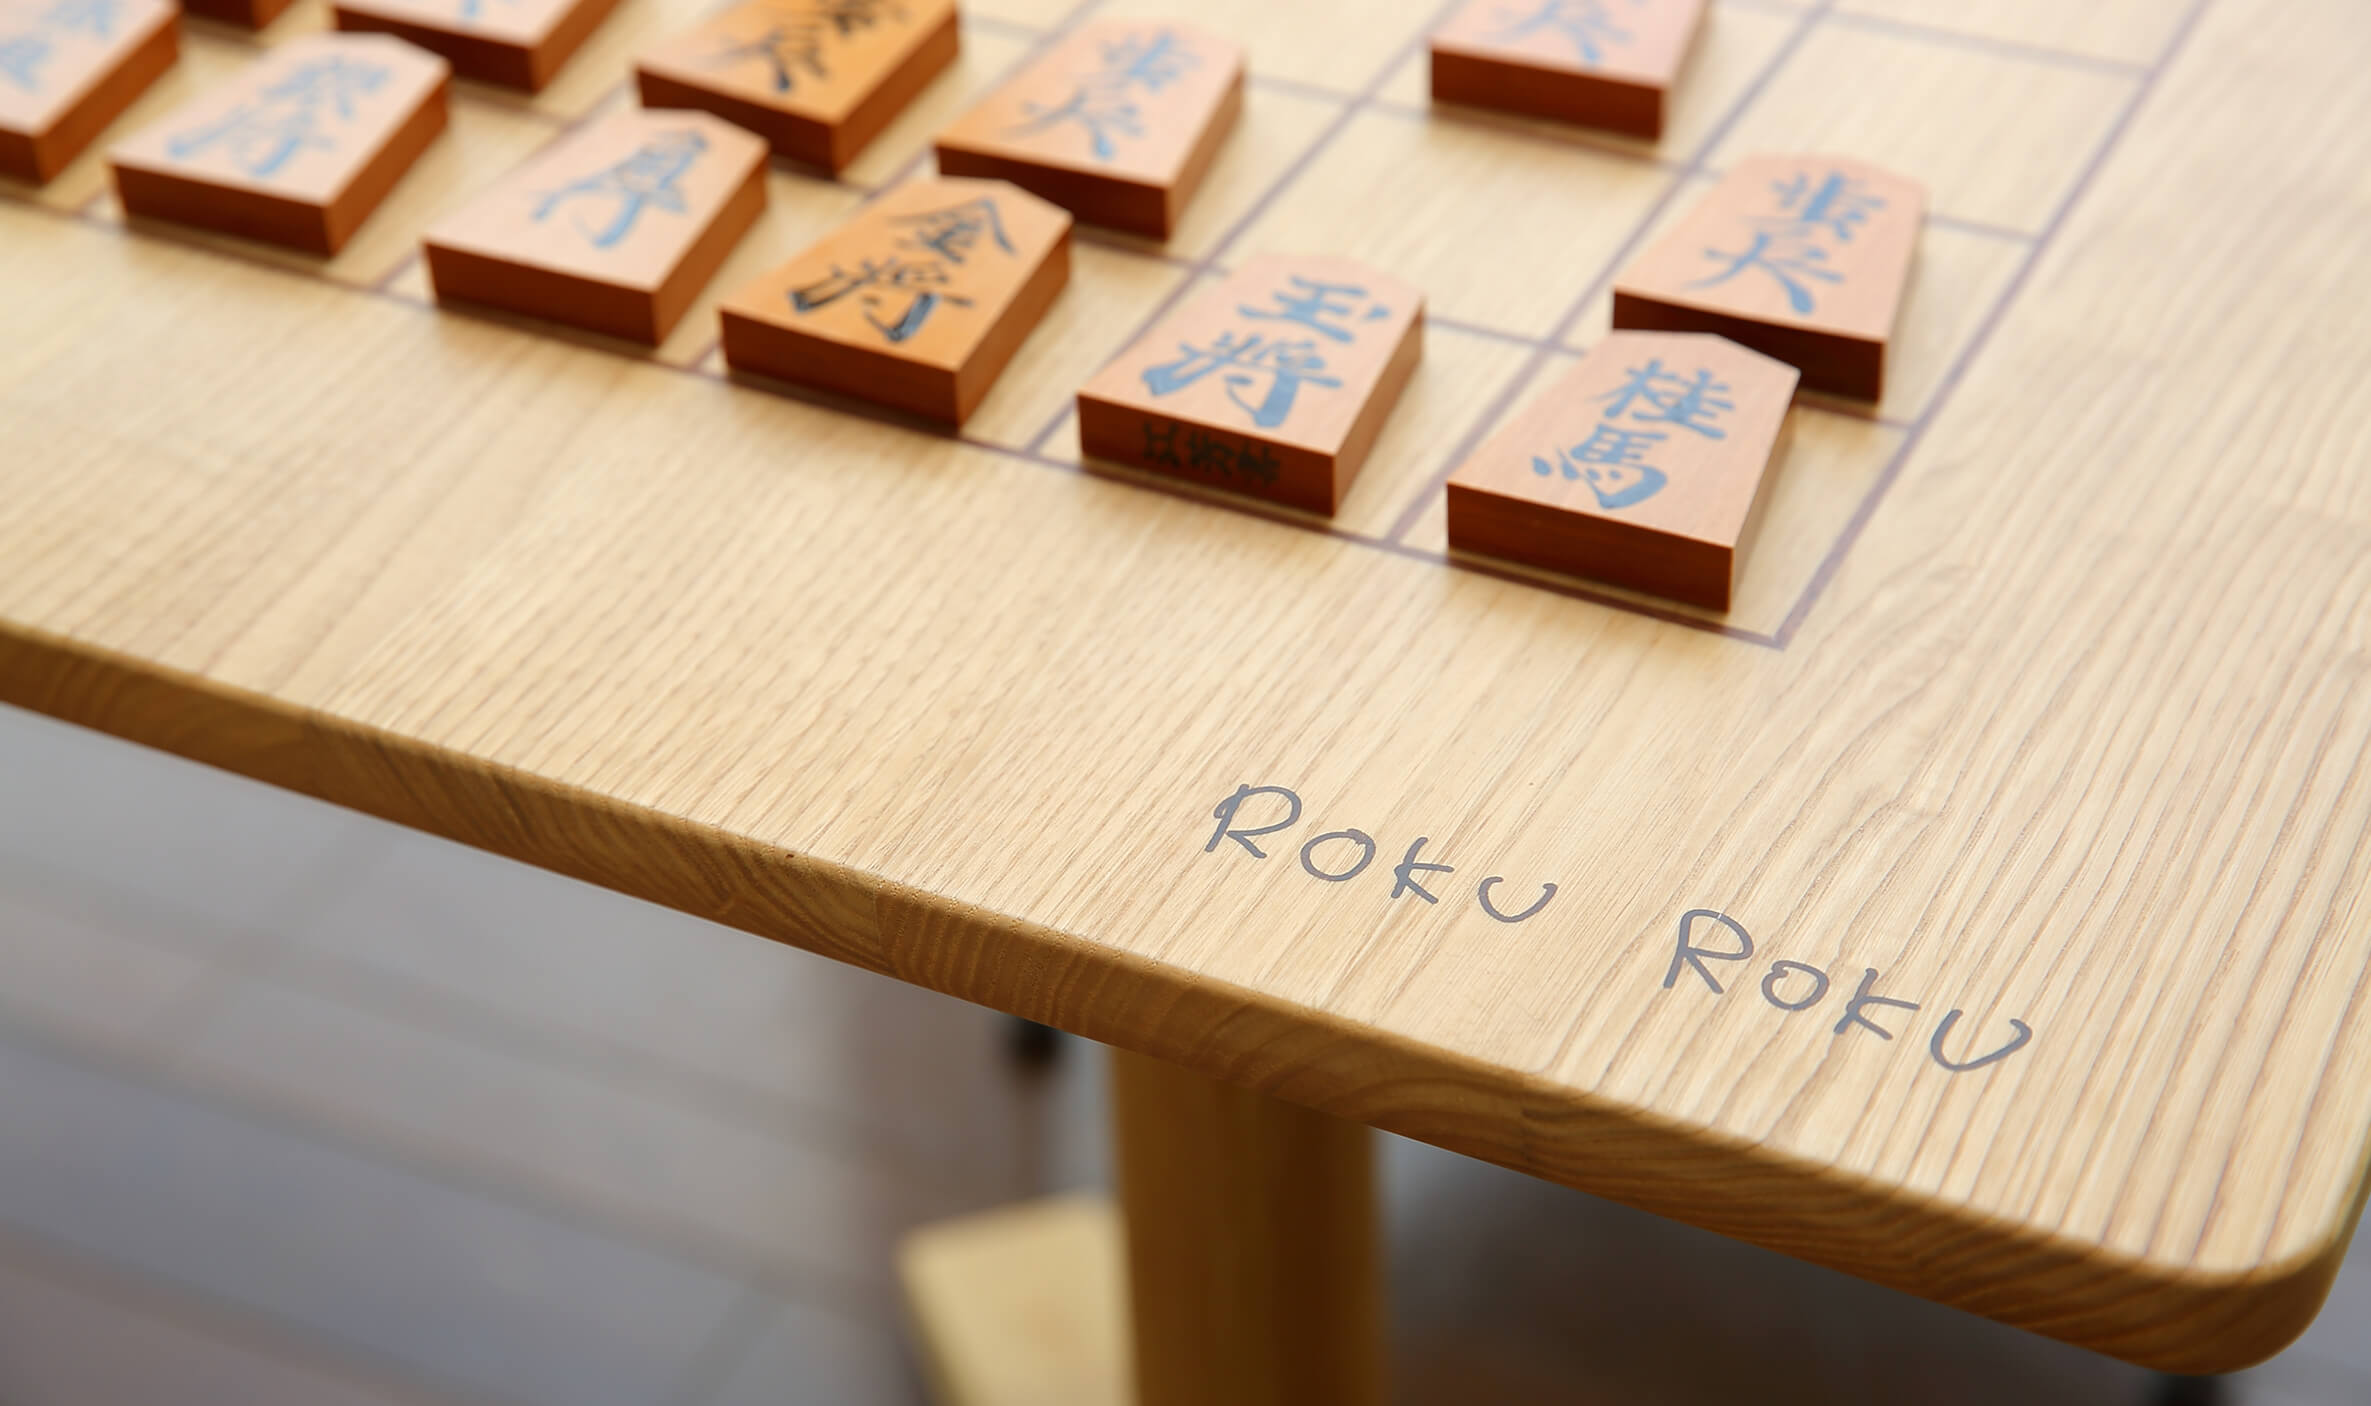 Shogi traditional board game(Japanese chess) wood board table and